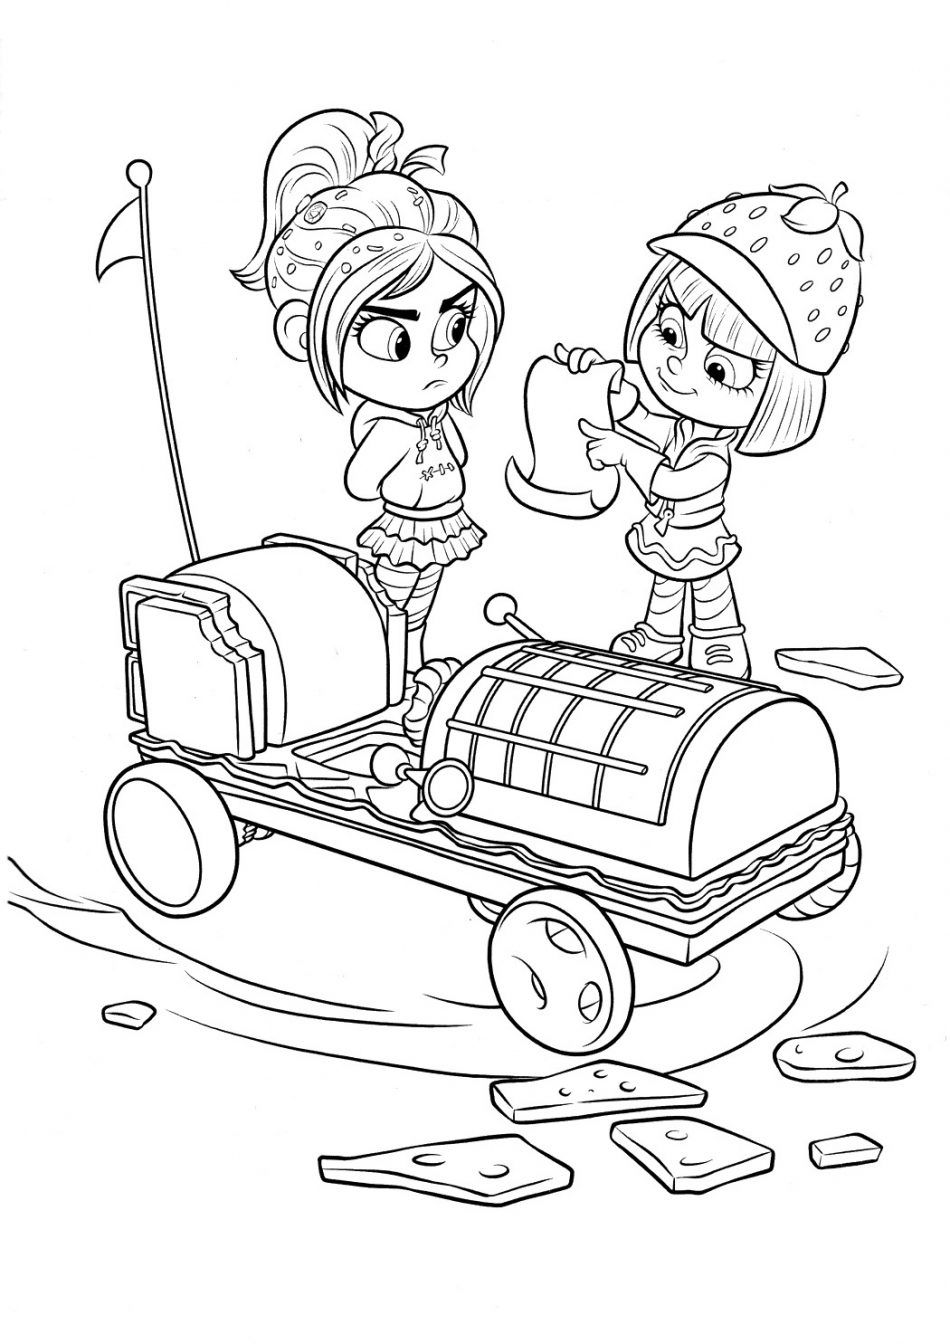 Taffyta And Vanellope Coloring Page   Disney Coloring Pages ...